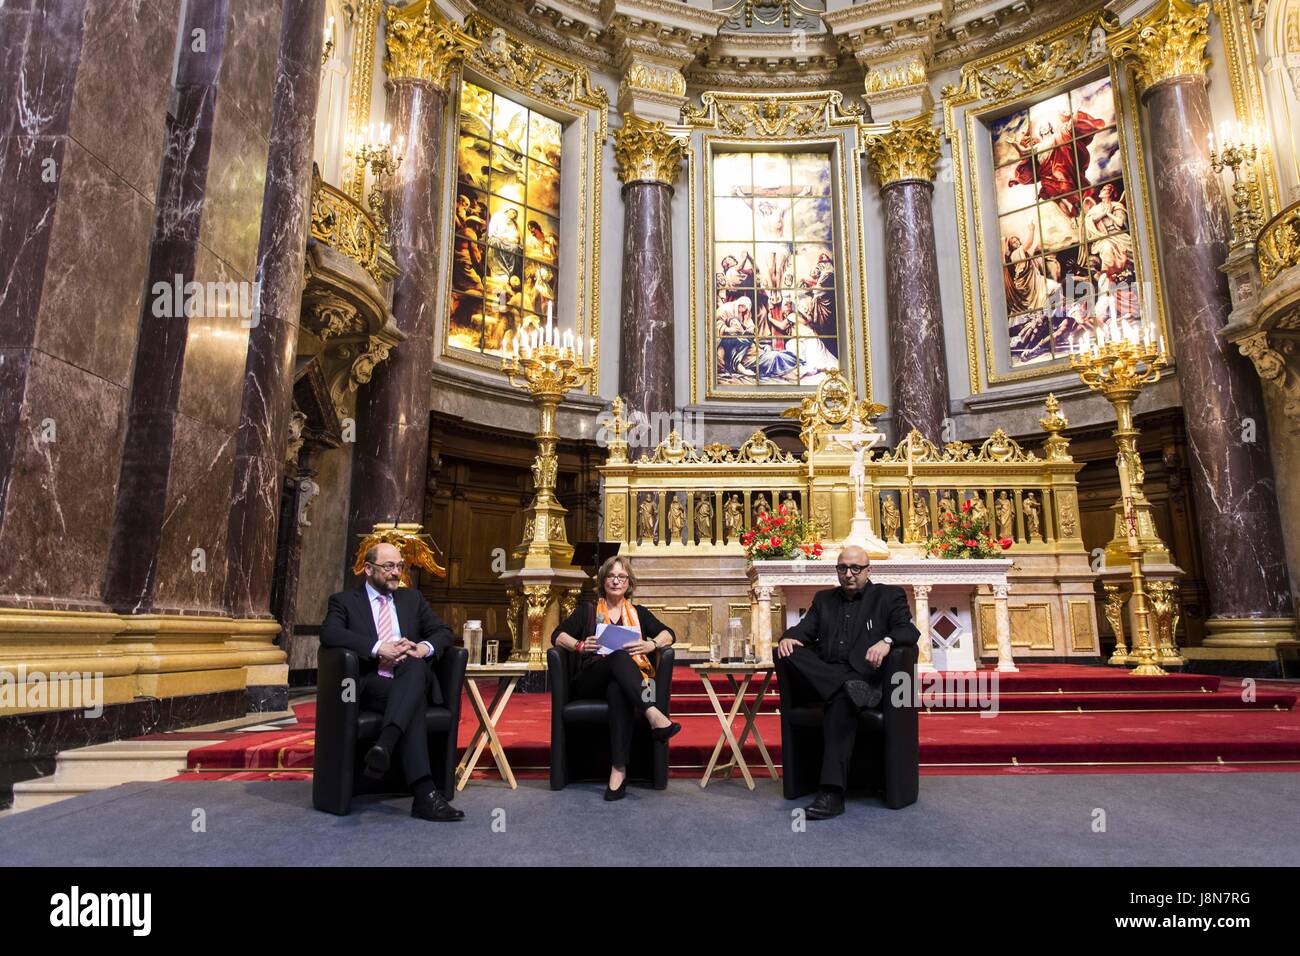 Berlin, Berlin, Germany. 26th May, 2017. MARTIN SCHULZ, candidate for the German Chancellorship and chairman of the Social Democratic Party of Germany (SPD) and former President of the European Parliament, in Berlin Cathedral during the 36th German Protestant Church Congress which take place in Berlin and Wittenberg from 24 to 28 May 2017 under the slogan 'You see me' [German: 'Du siehst mich' Credit: Jan Scheunert/ZUMA Wire/Alamy Live News Stock Photo